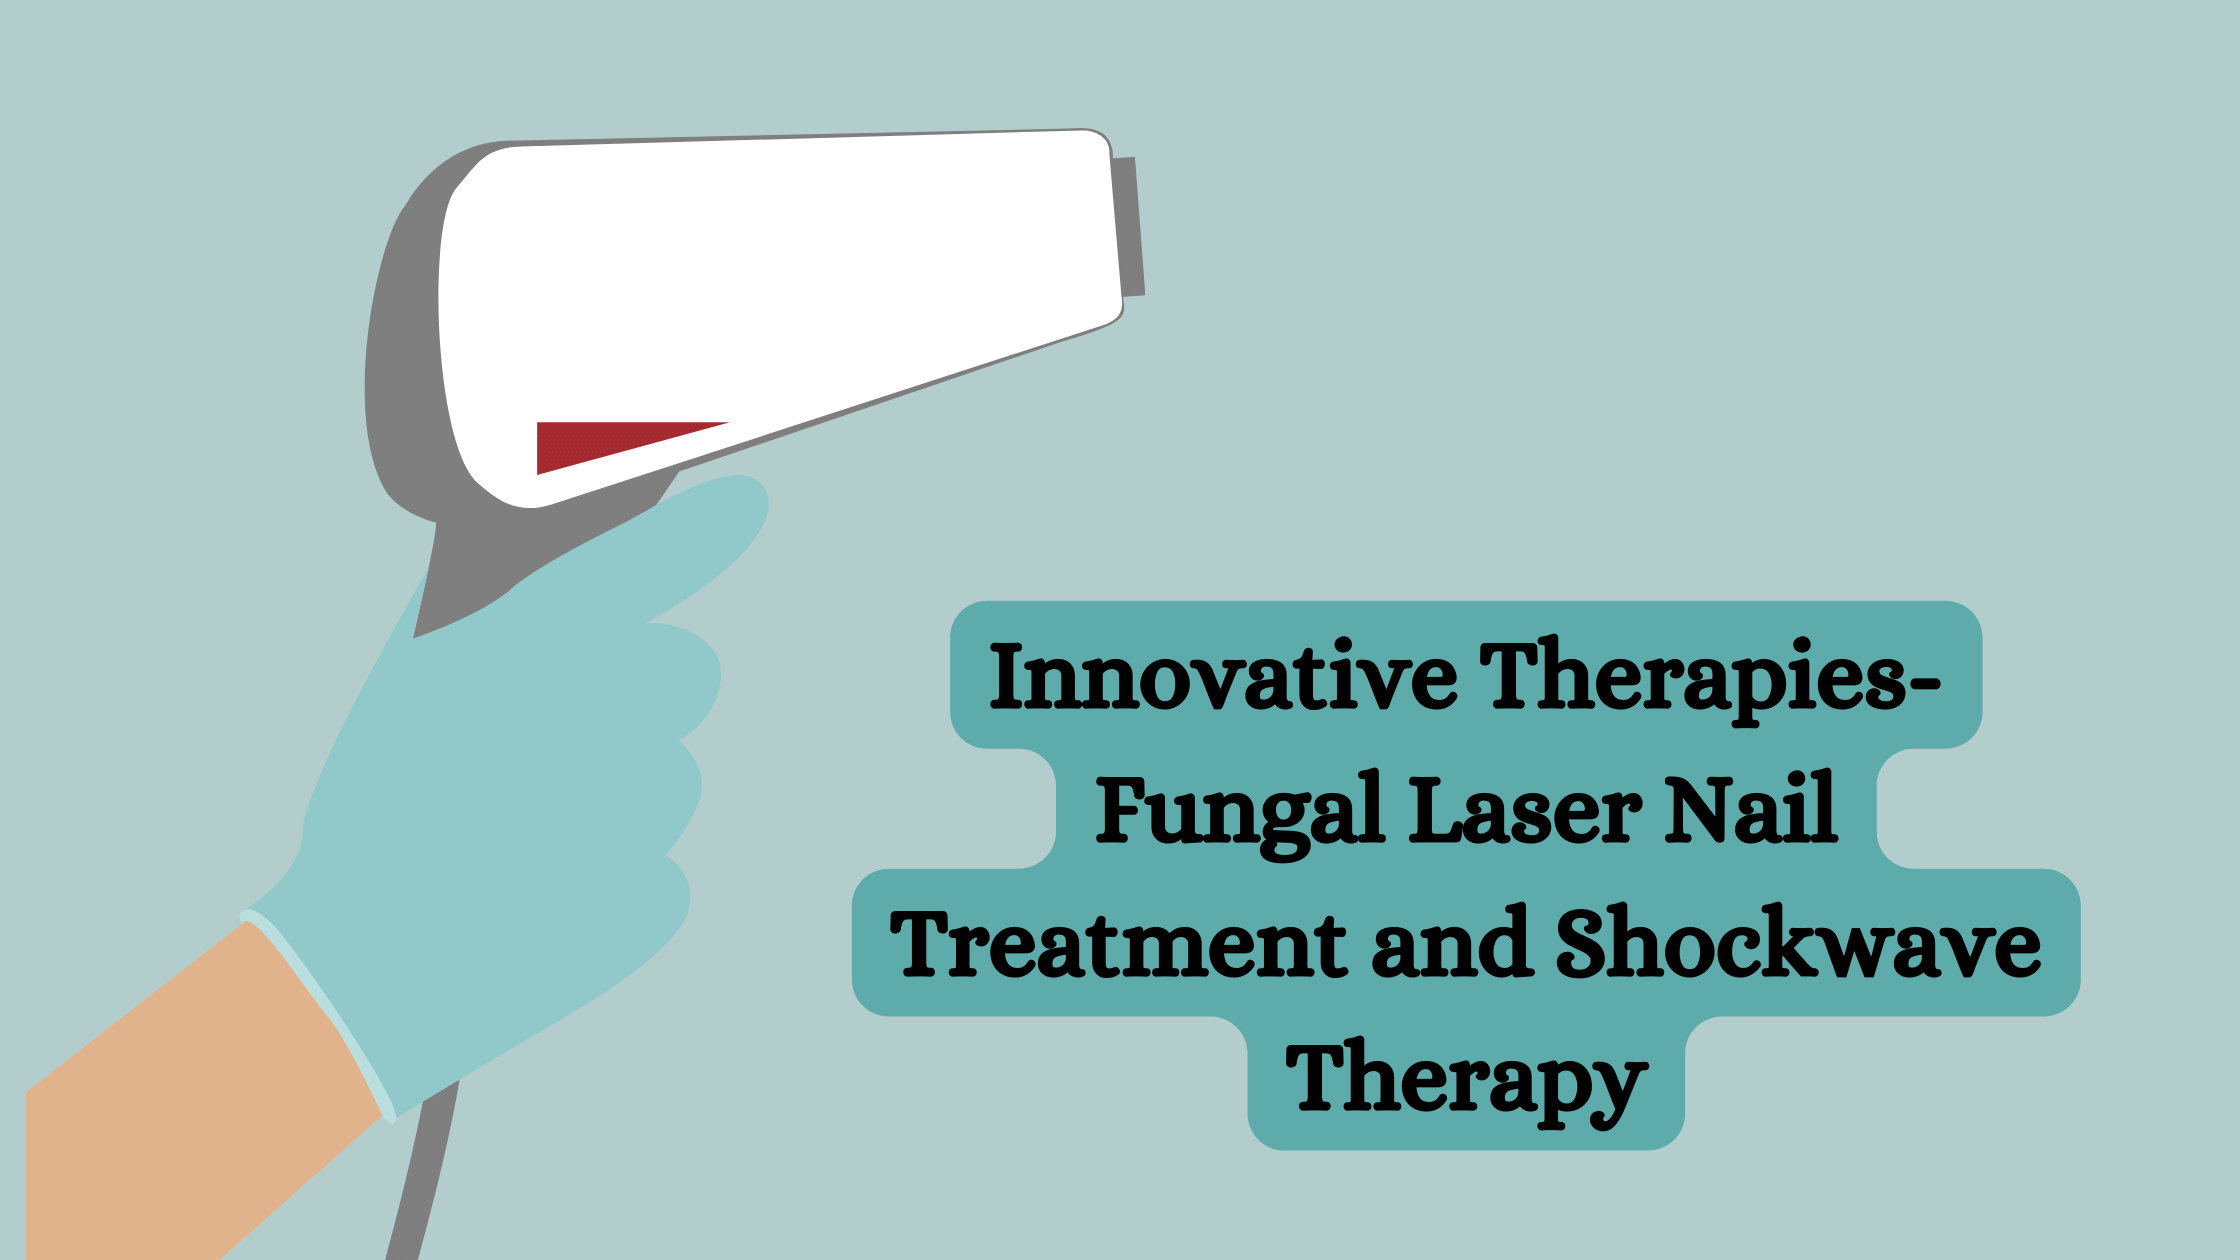 Fungal Laser Nail Treatment and Shockwave Therapy